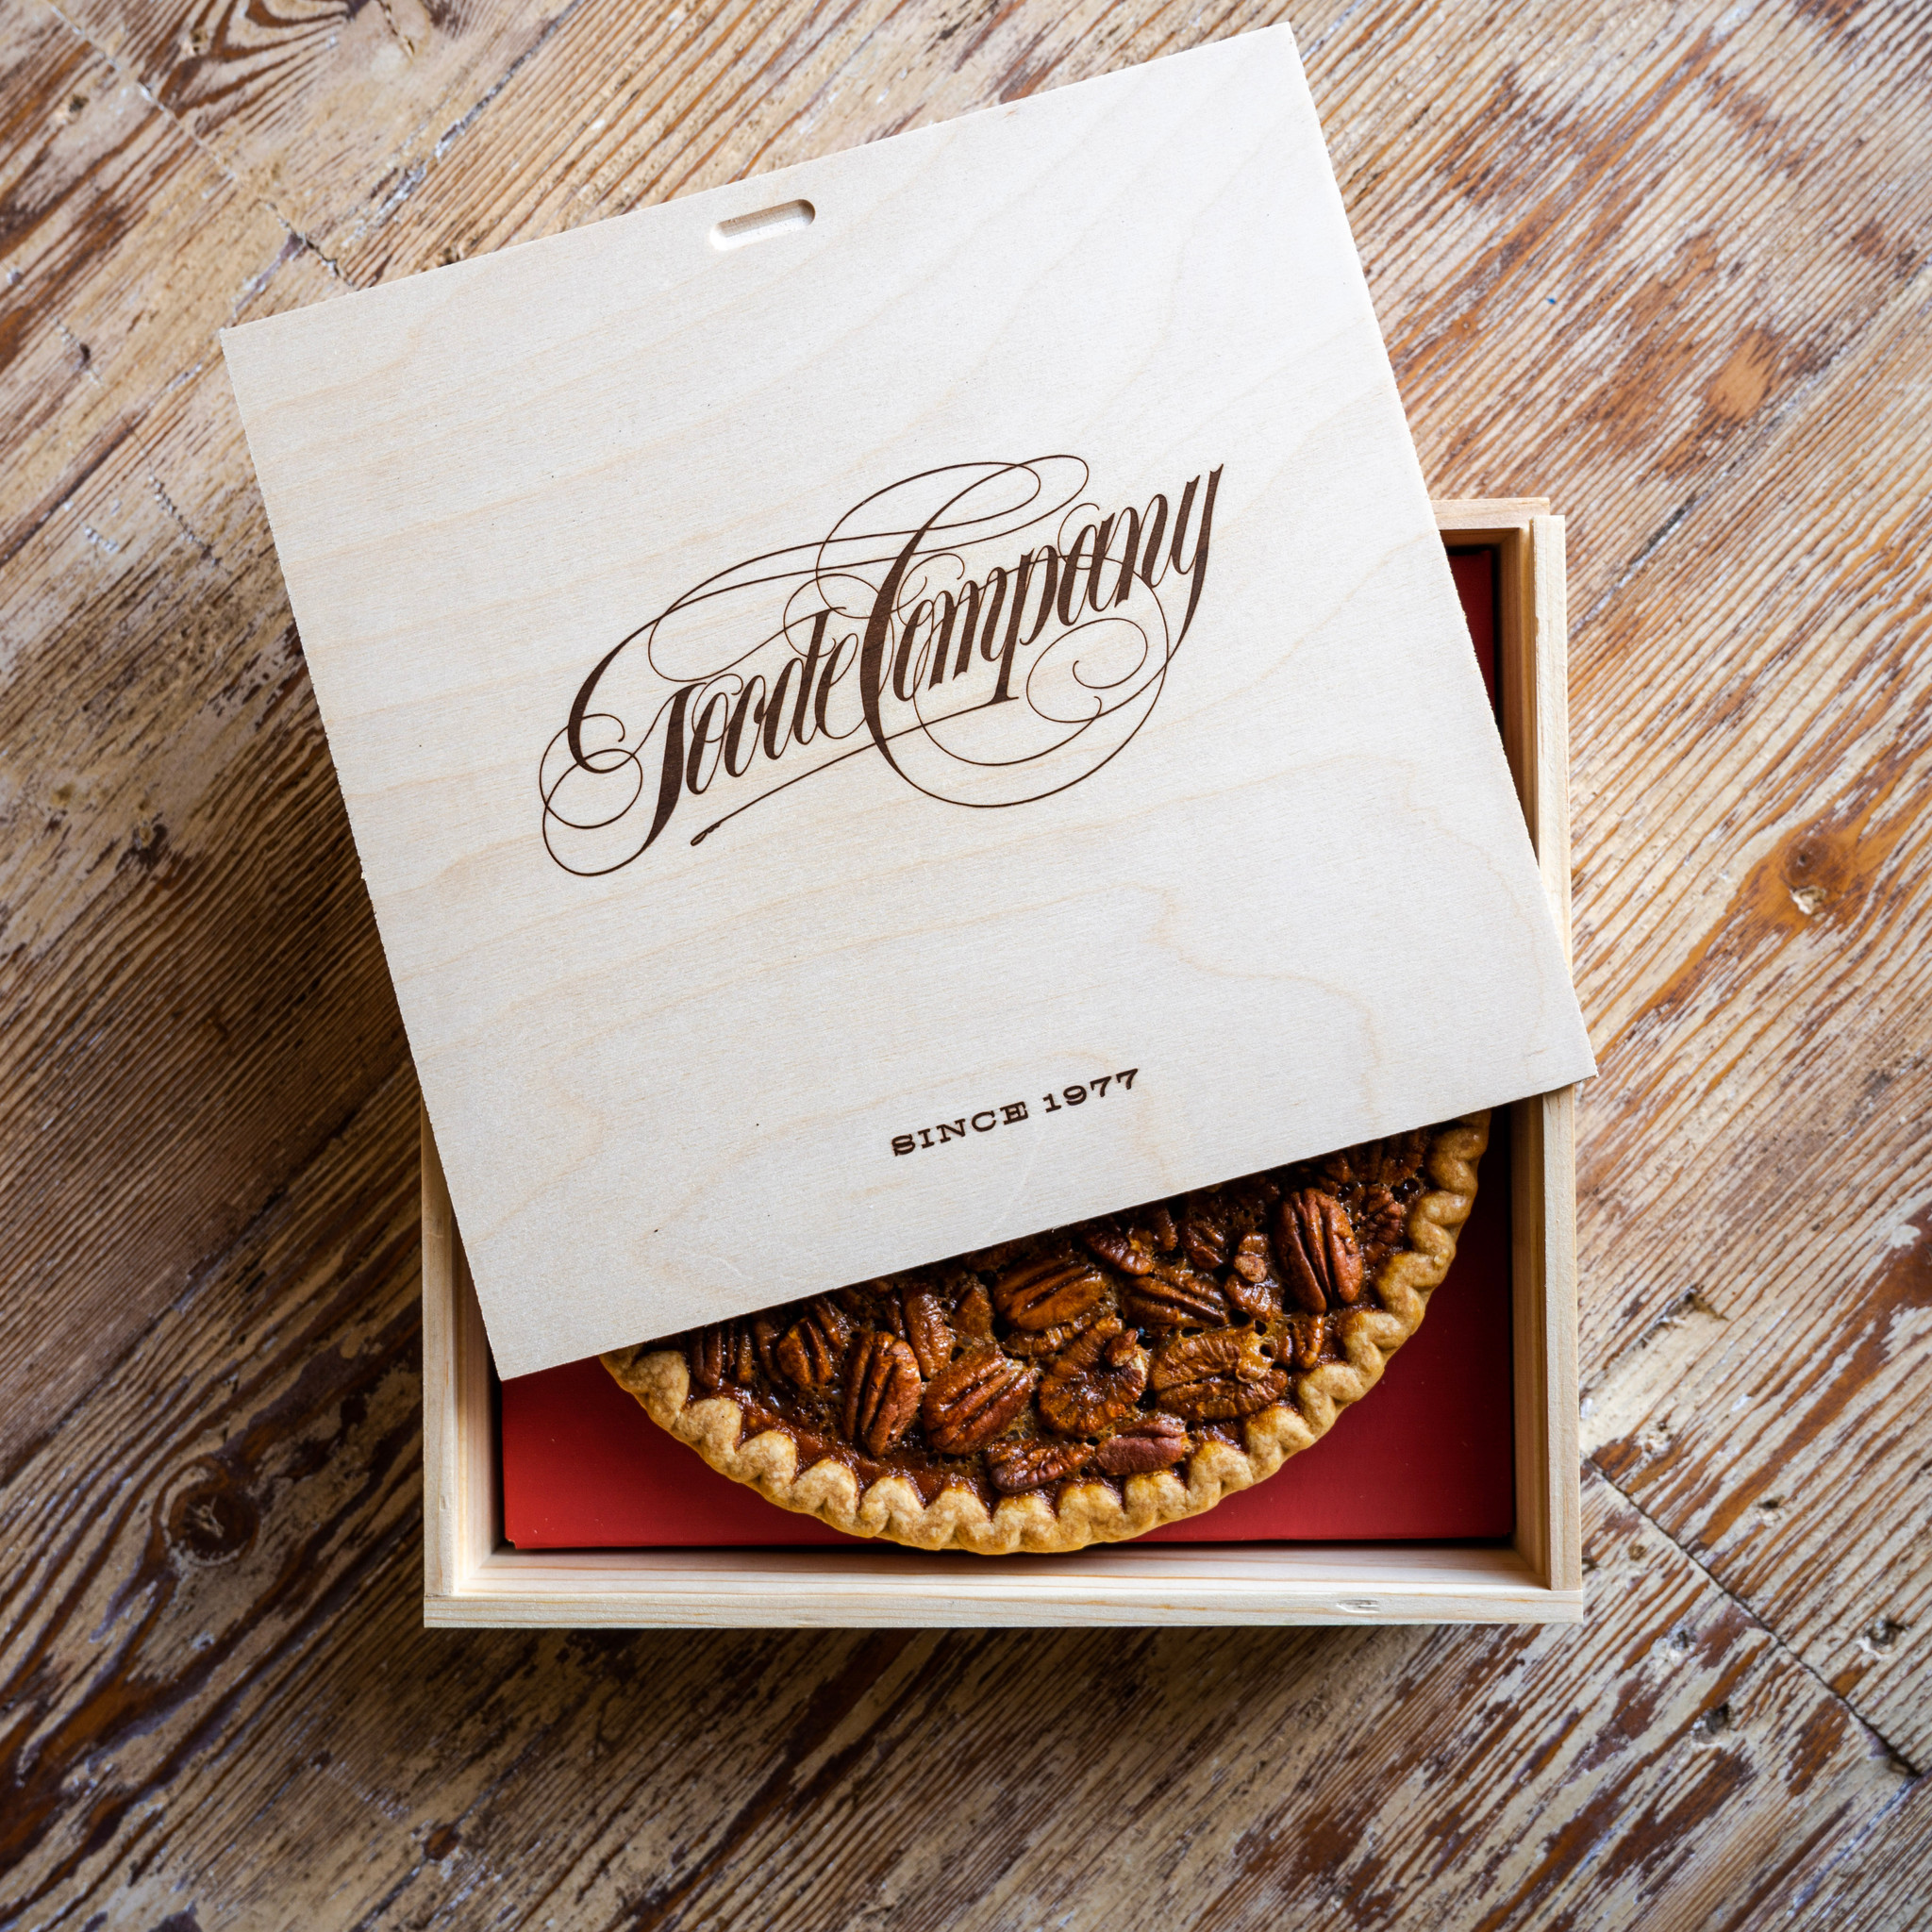 Pecan pie in a wooden box with the lid that shows the name Goode Company written in iconic script logo